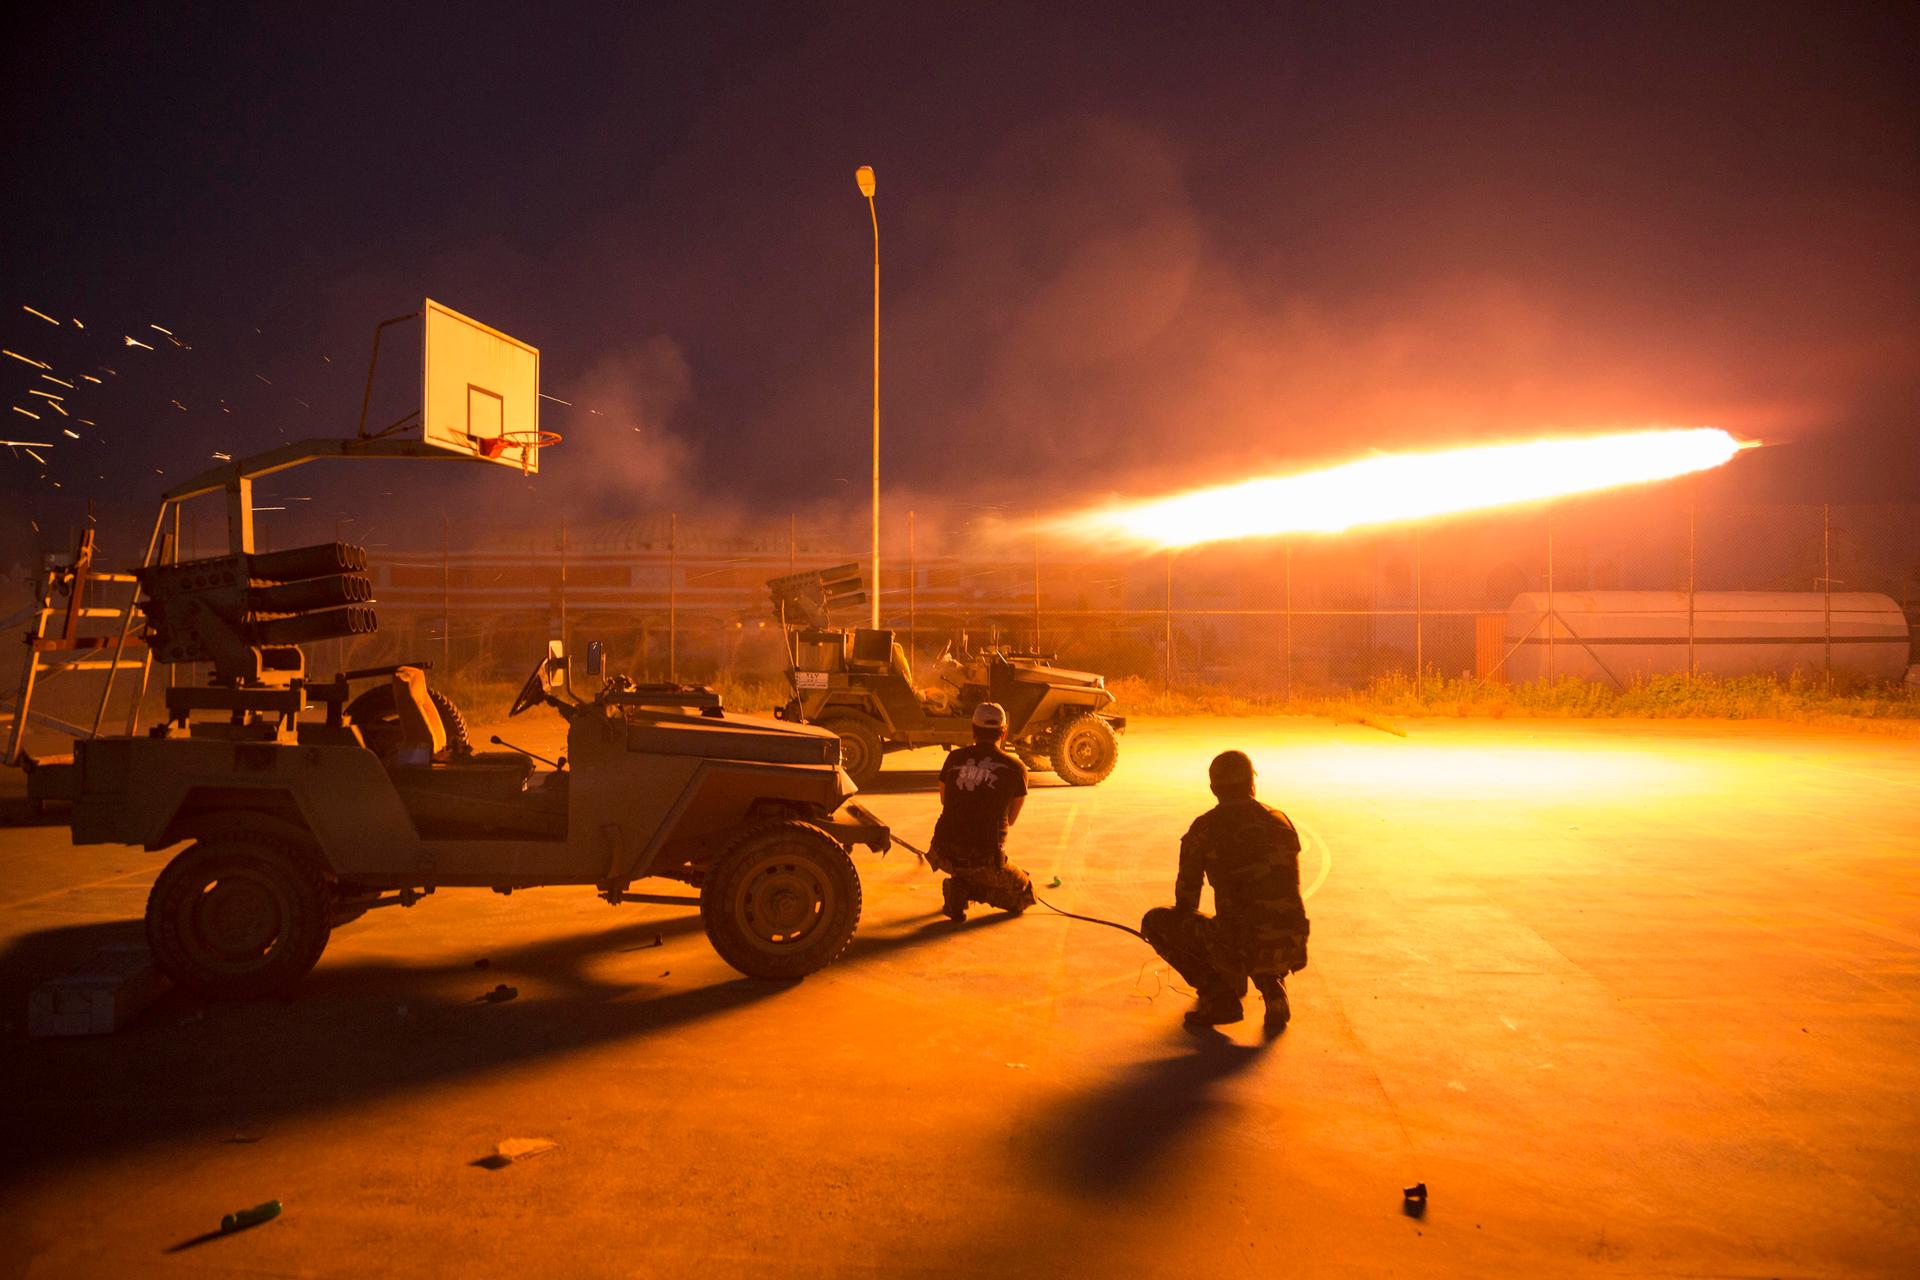 Shiite fighters fire a rocket during clashes with ISIS militants in Iraq's Salahuddin province on March 1, 2015. Thousands of Iraqi soldiers and Shiite militiamen sought to seal off ISIS in Tikrit and nearby towns.